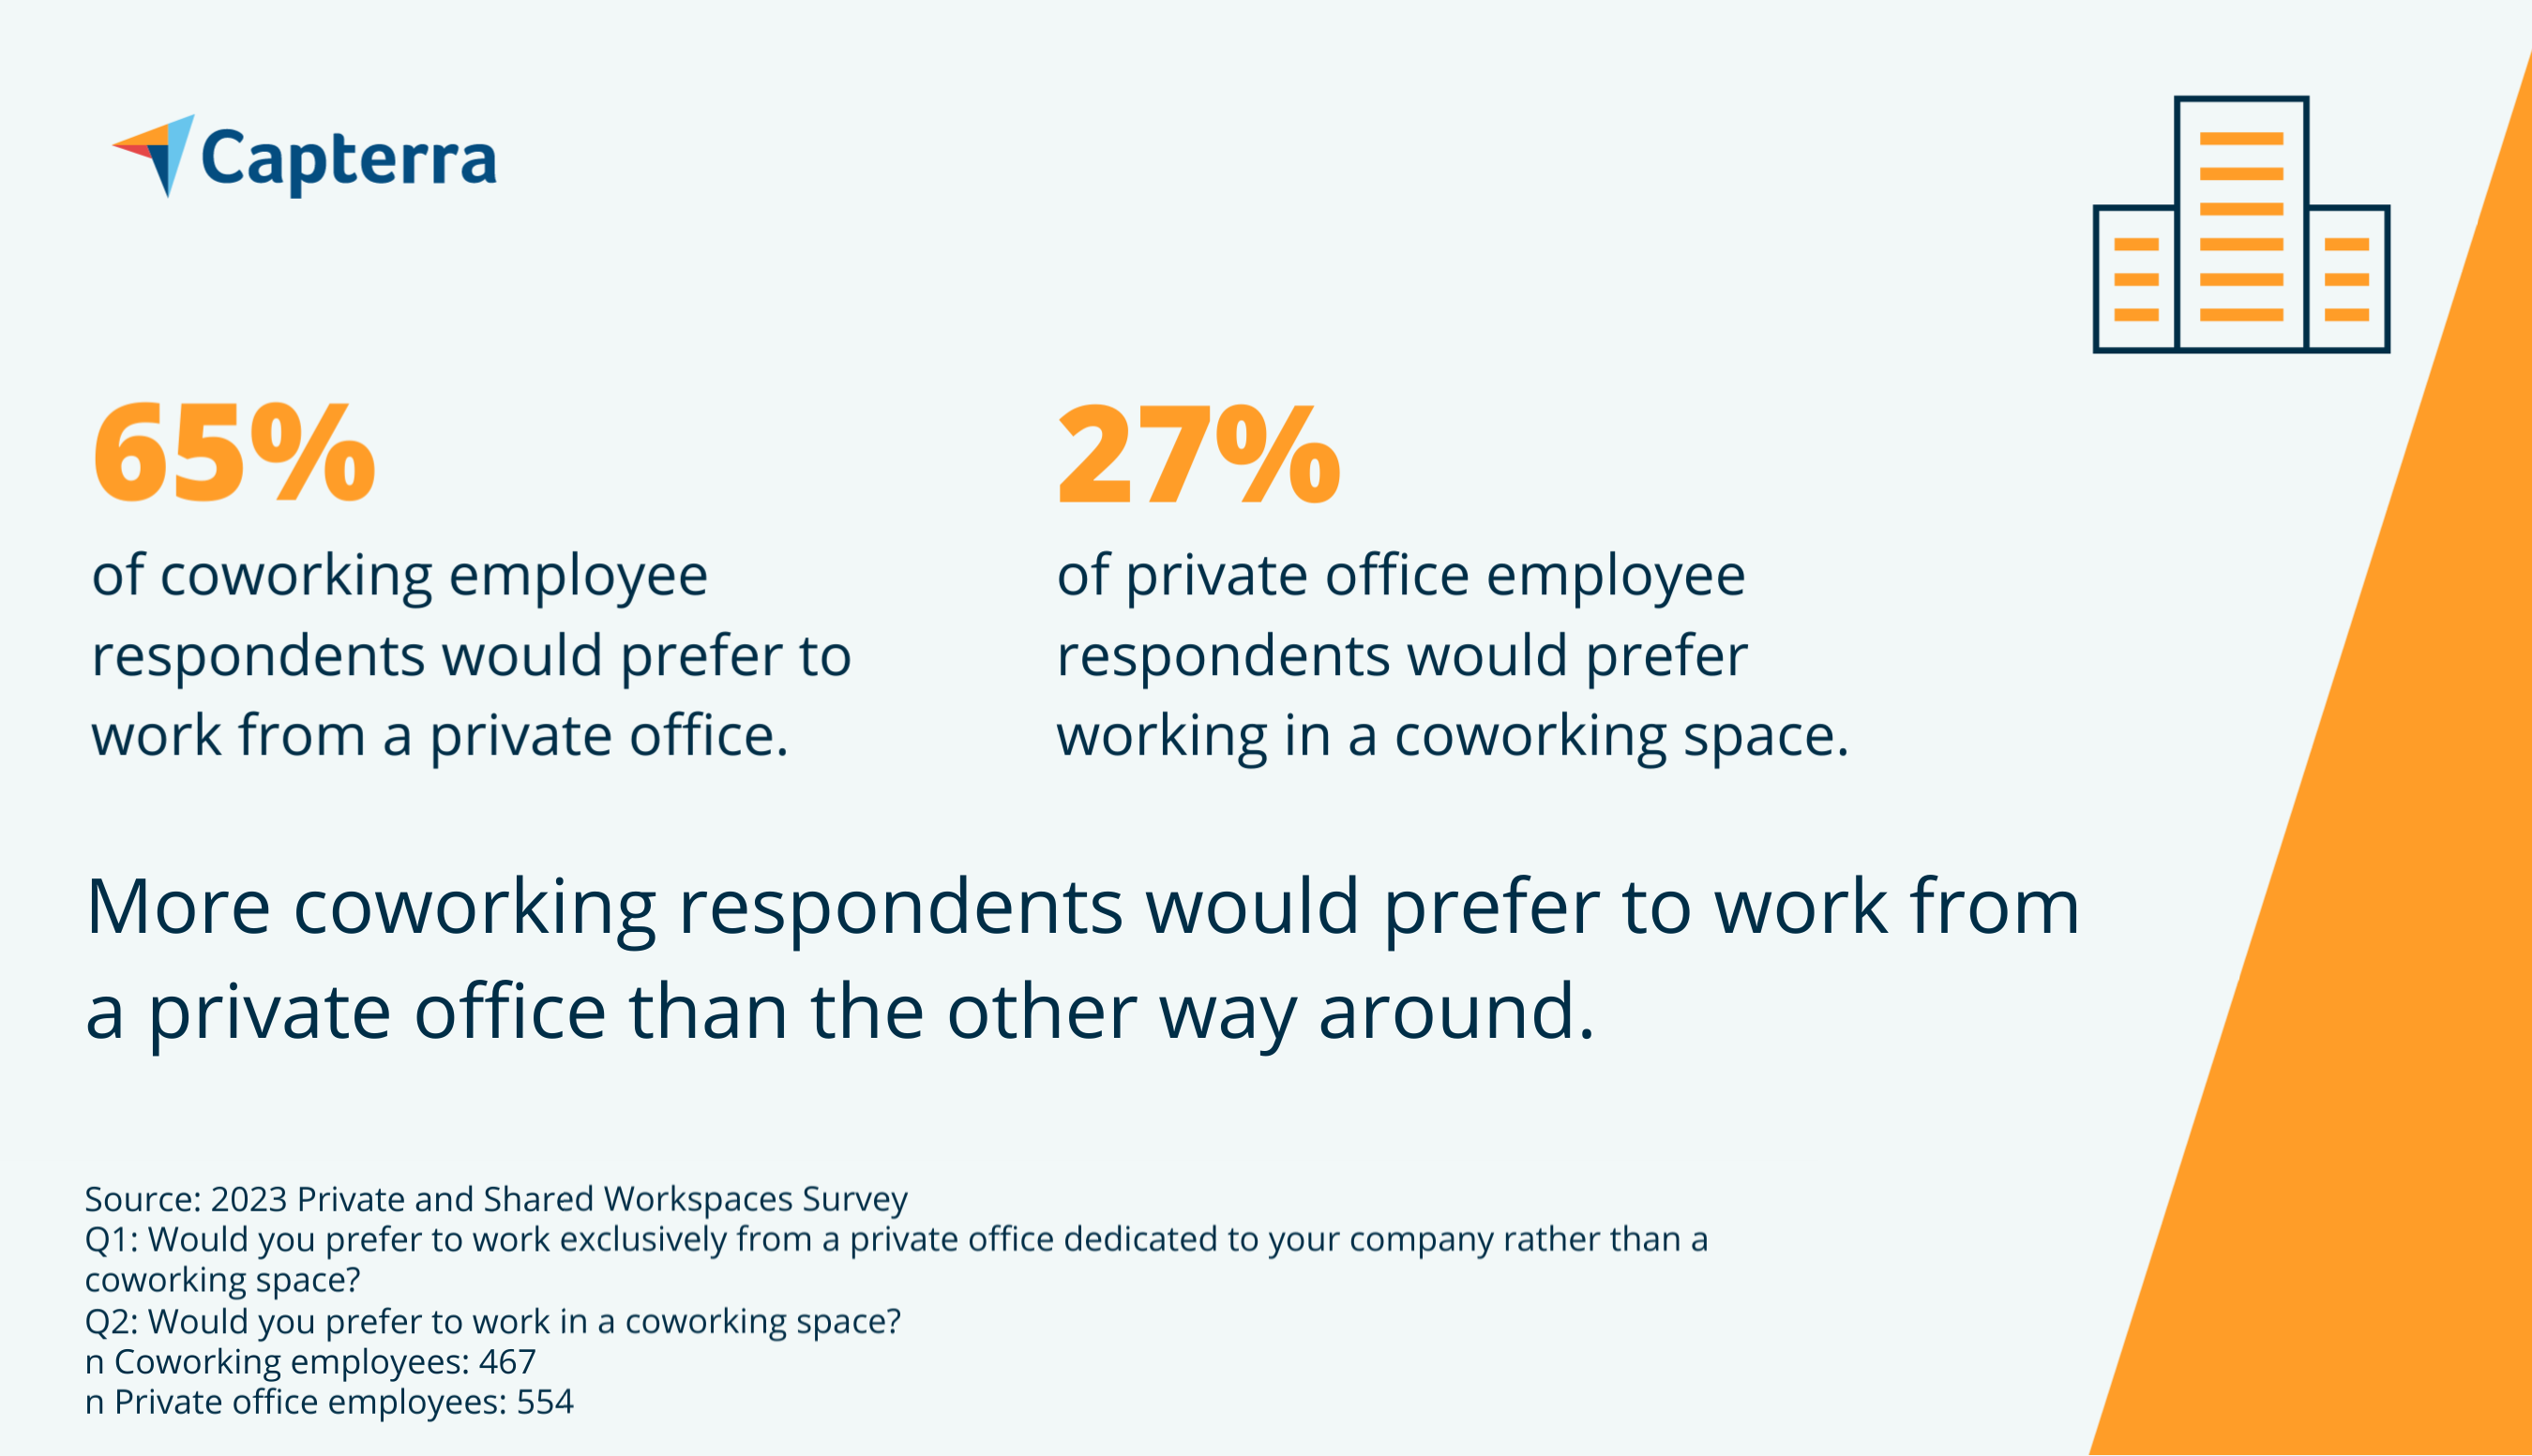 preferences for private office vs coworking space